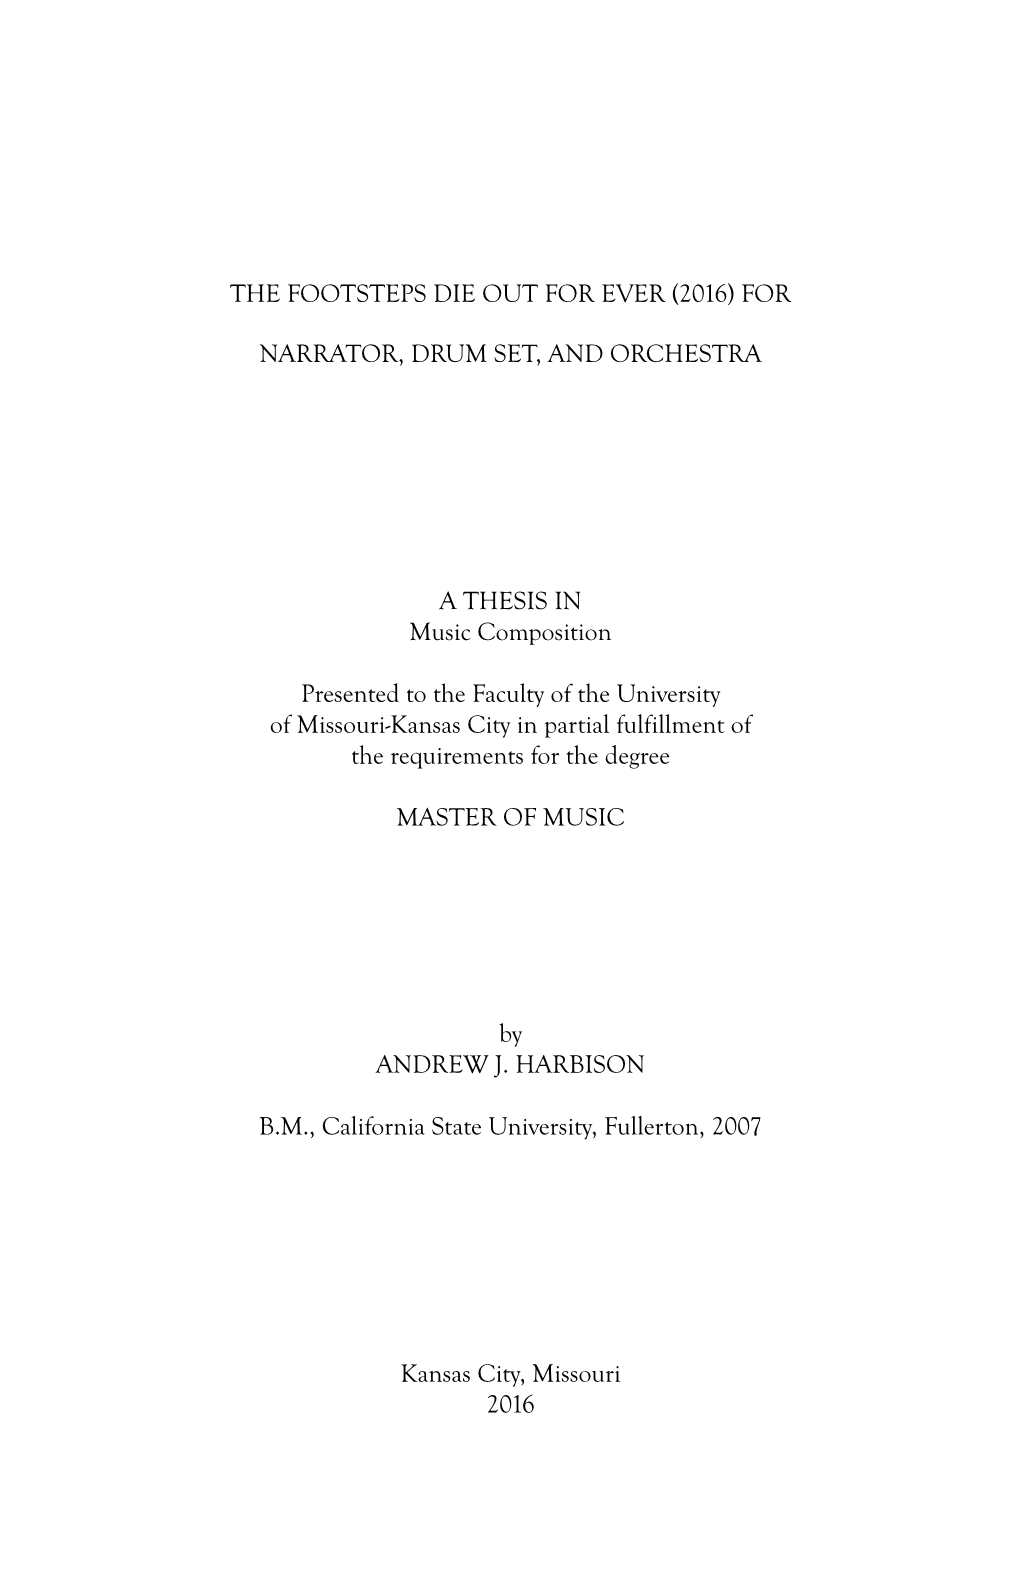 Thesis Cover and Title Pages